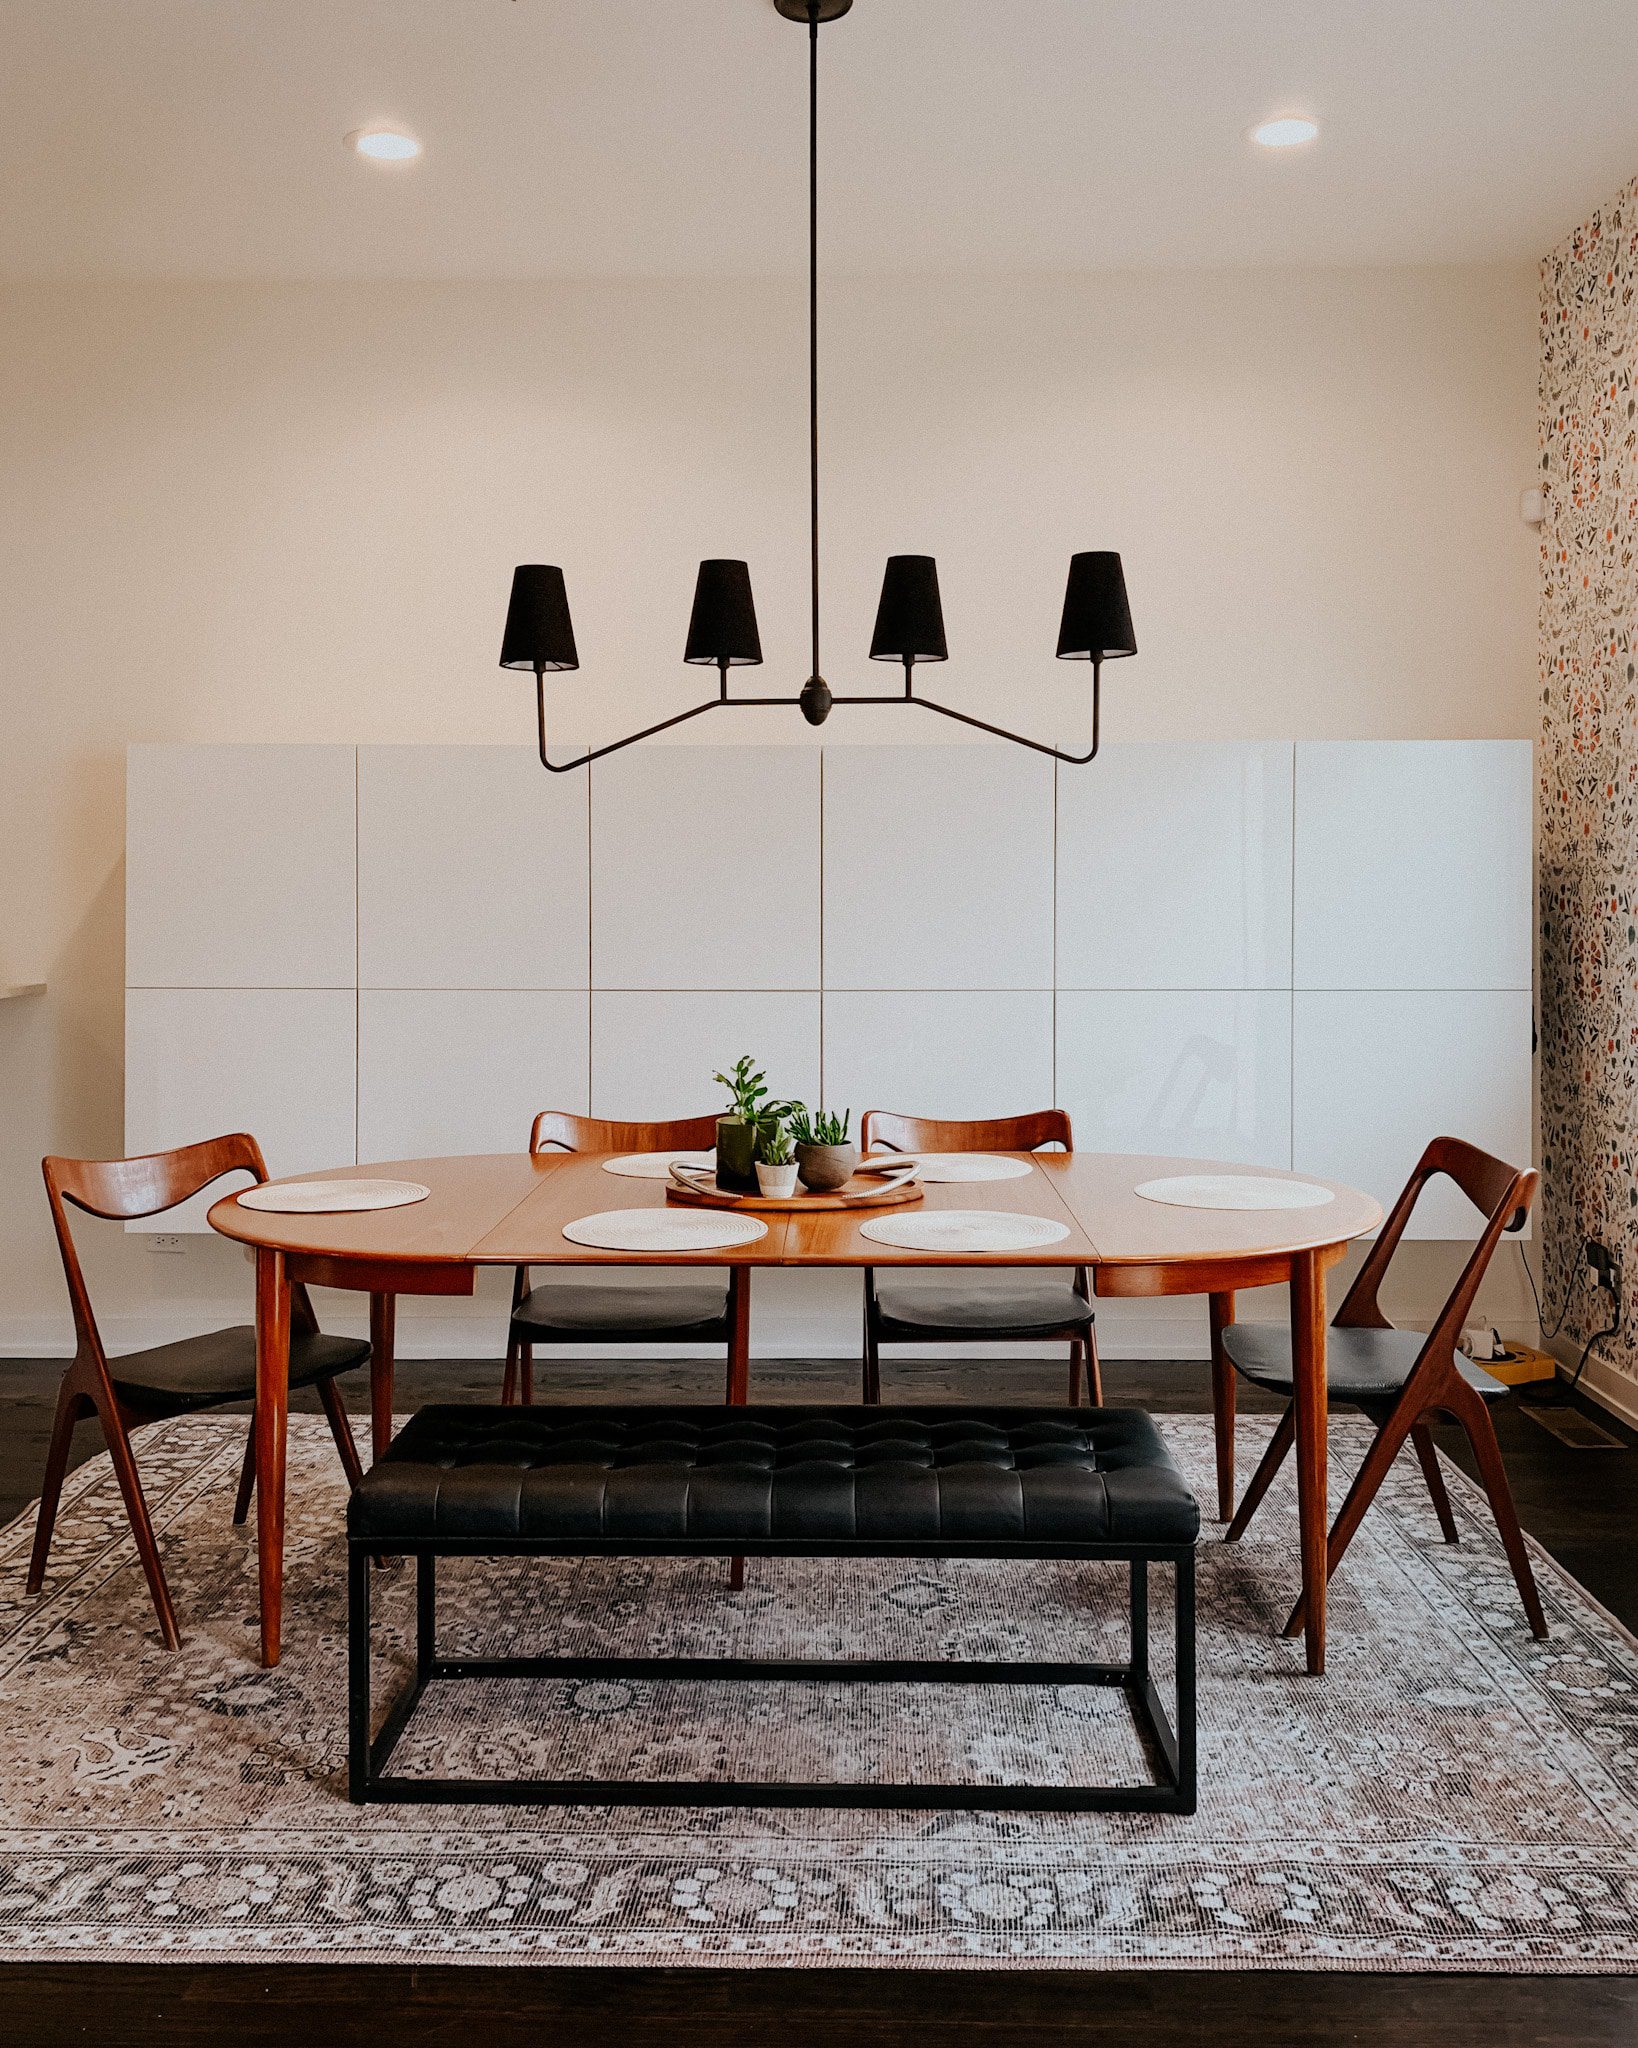 Mid century modern dining room set with a traditional touch | via Yellow Brick Home #YBHxKalvakota